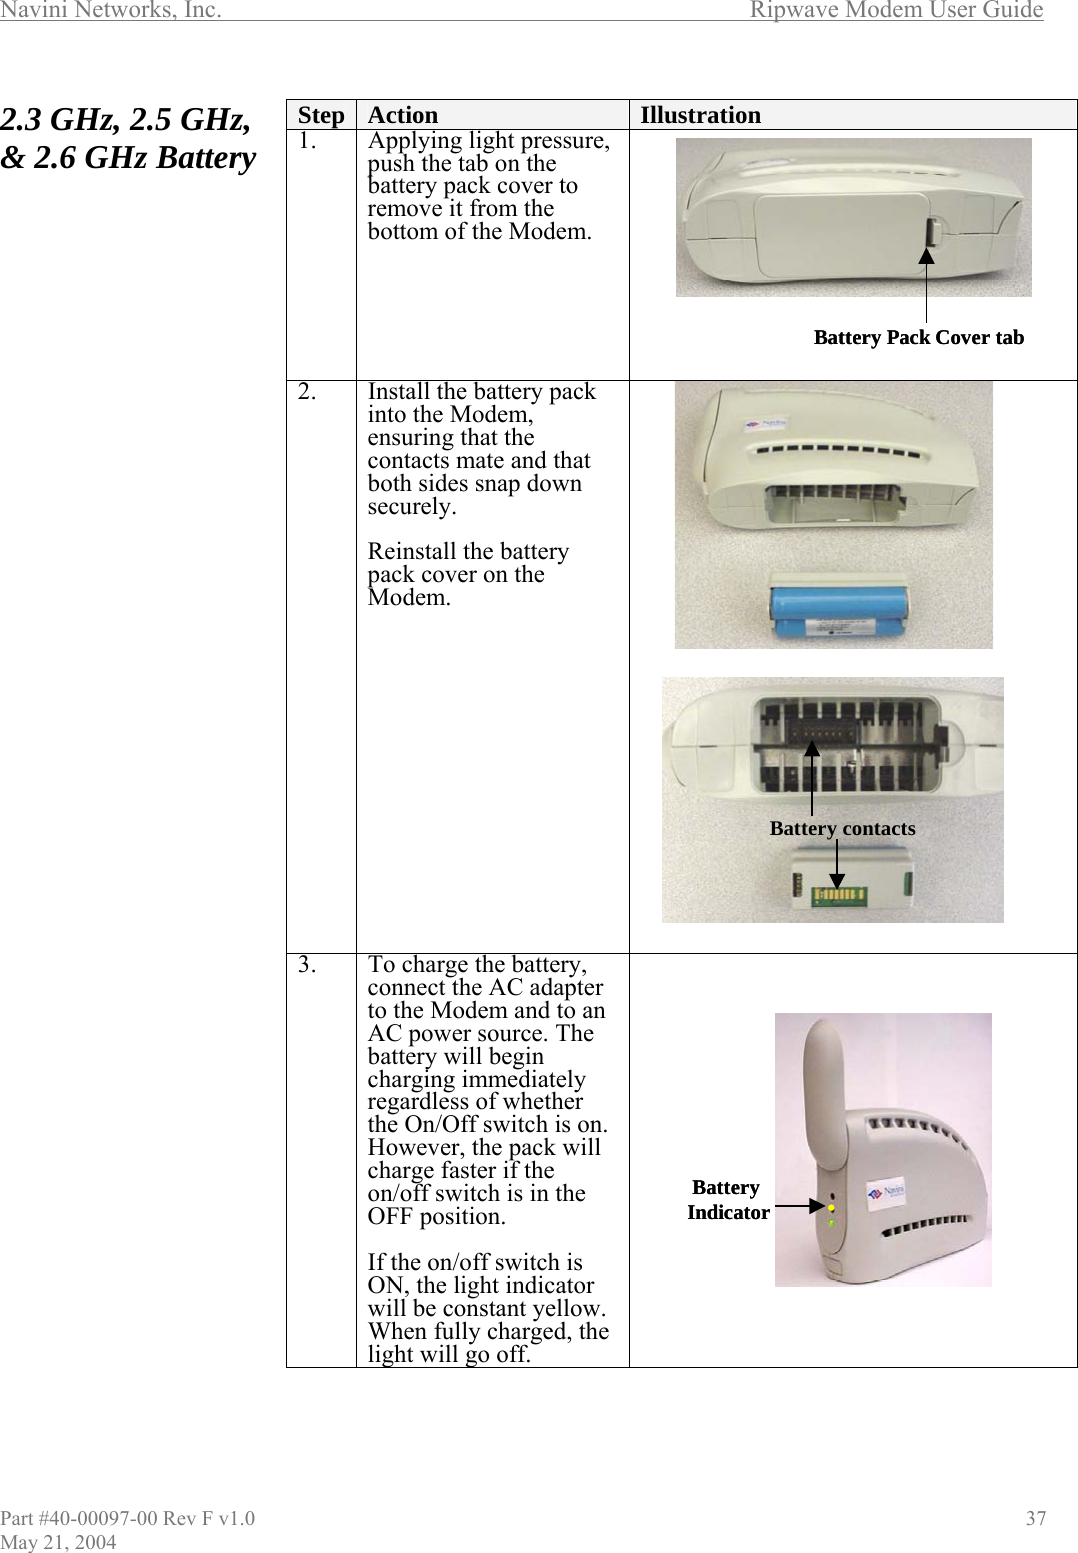 Navini Networks, Inc.        Ripwave Modem User Guide Part #40-00097-00 Rev F v1.0   y 21, 2004                                       37 Ma.3 GHz, 2.5 GHz,  2.6 GHz Battery 2&amp;                                            Step  Action  Illustration 1.  Applying light pressure,  tab on the .  push thebattery pack cover to remove it from the bottom of the Modem2.  Install the battery pack into the Modem, ensuring that the  contacts mate and that both sides snap down securely.  Reinstall the battery pack cover on the Modem.  3.   an e immediately   the on/off switch is ON, the light indicator will be constant yellow. en fully charged, the light will go off.  To charge the battery, connect the AC adapterto the Modem and toAC power source. Thbattery will begin harging cregardless of whether the On/Off switch is on.However, the pack will charge faster if the on/off switch is in the OFF position.  IfWhBattery  Indicator .BatteryIndicator .Battery Pack Cover tabBattery Pack Cover tabBattery contactsBattery contacts